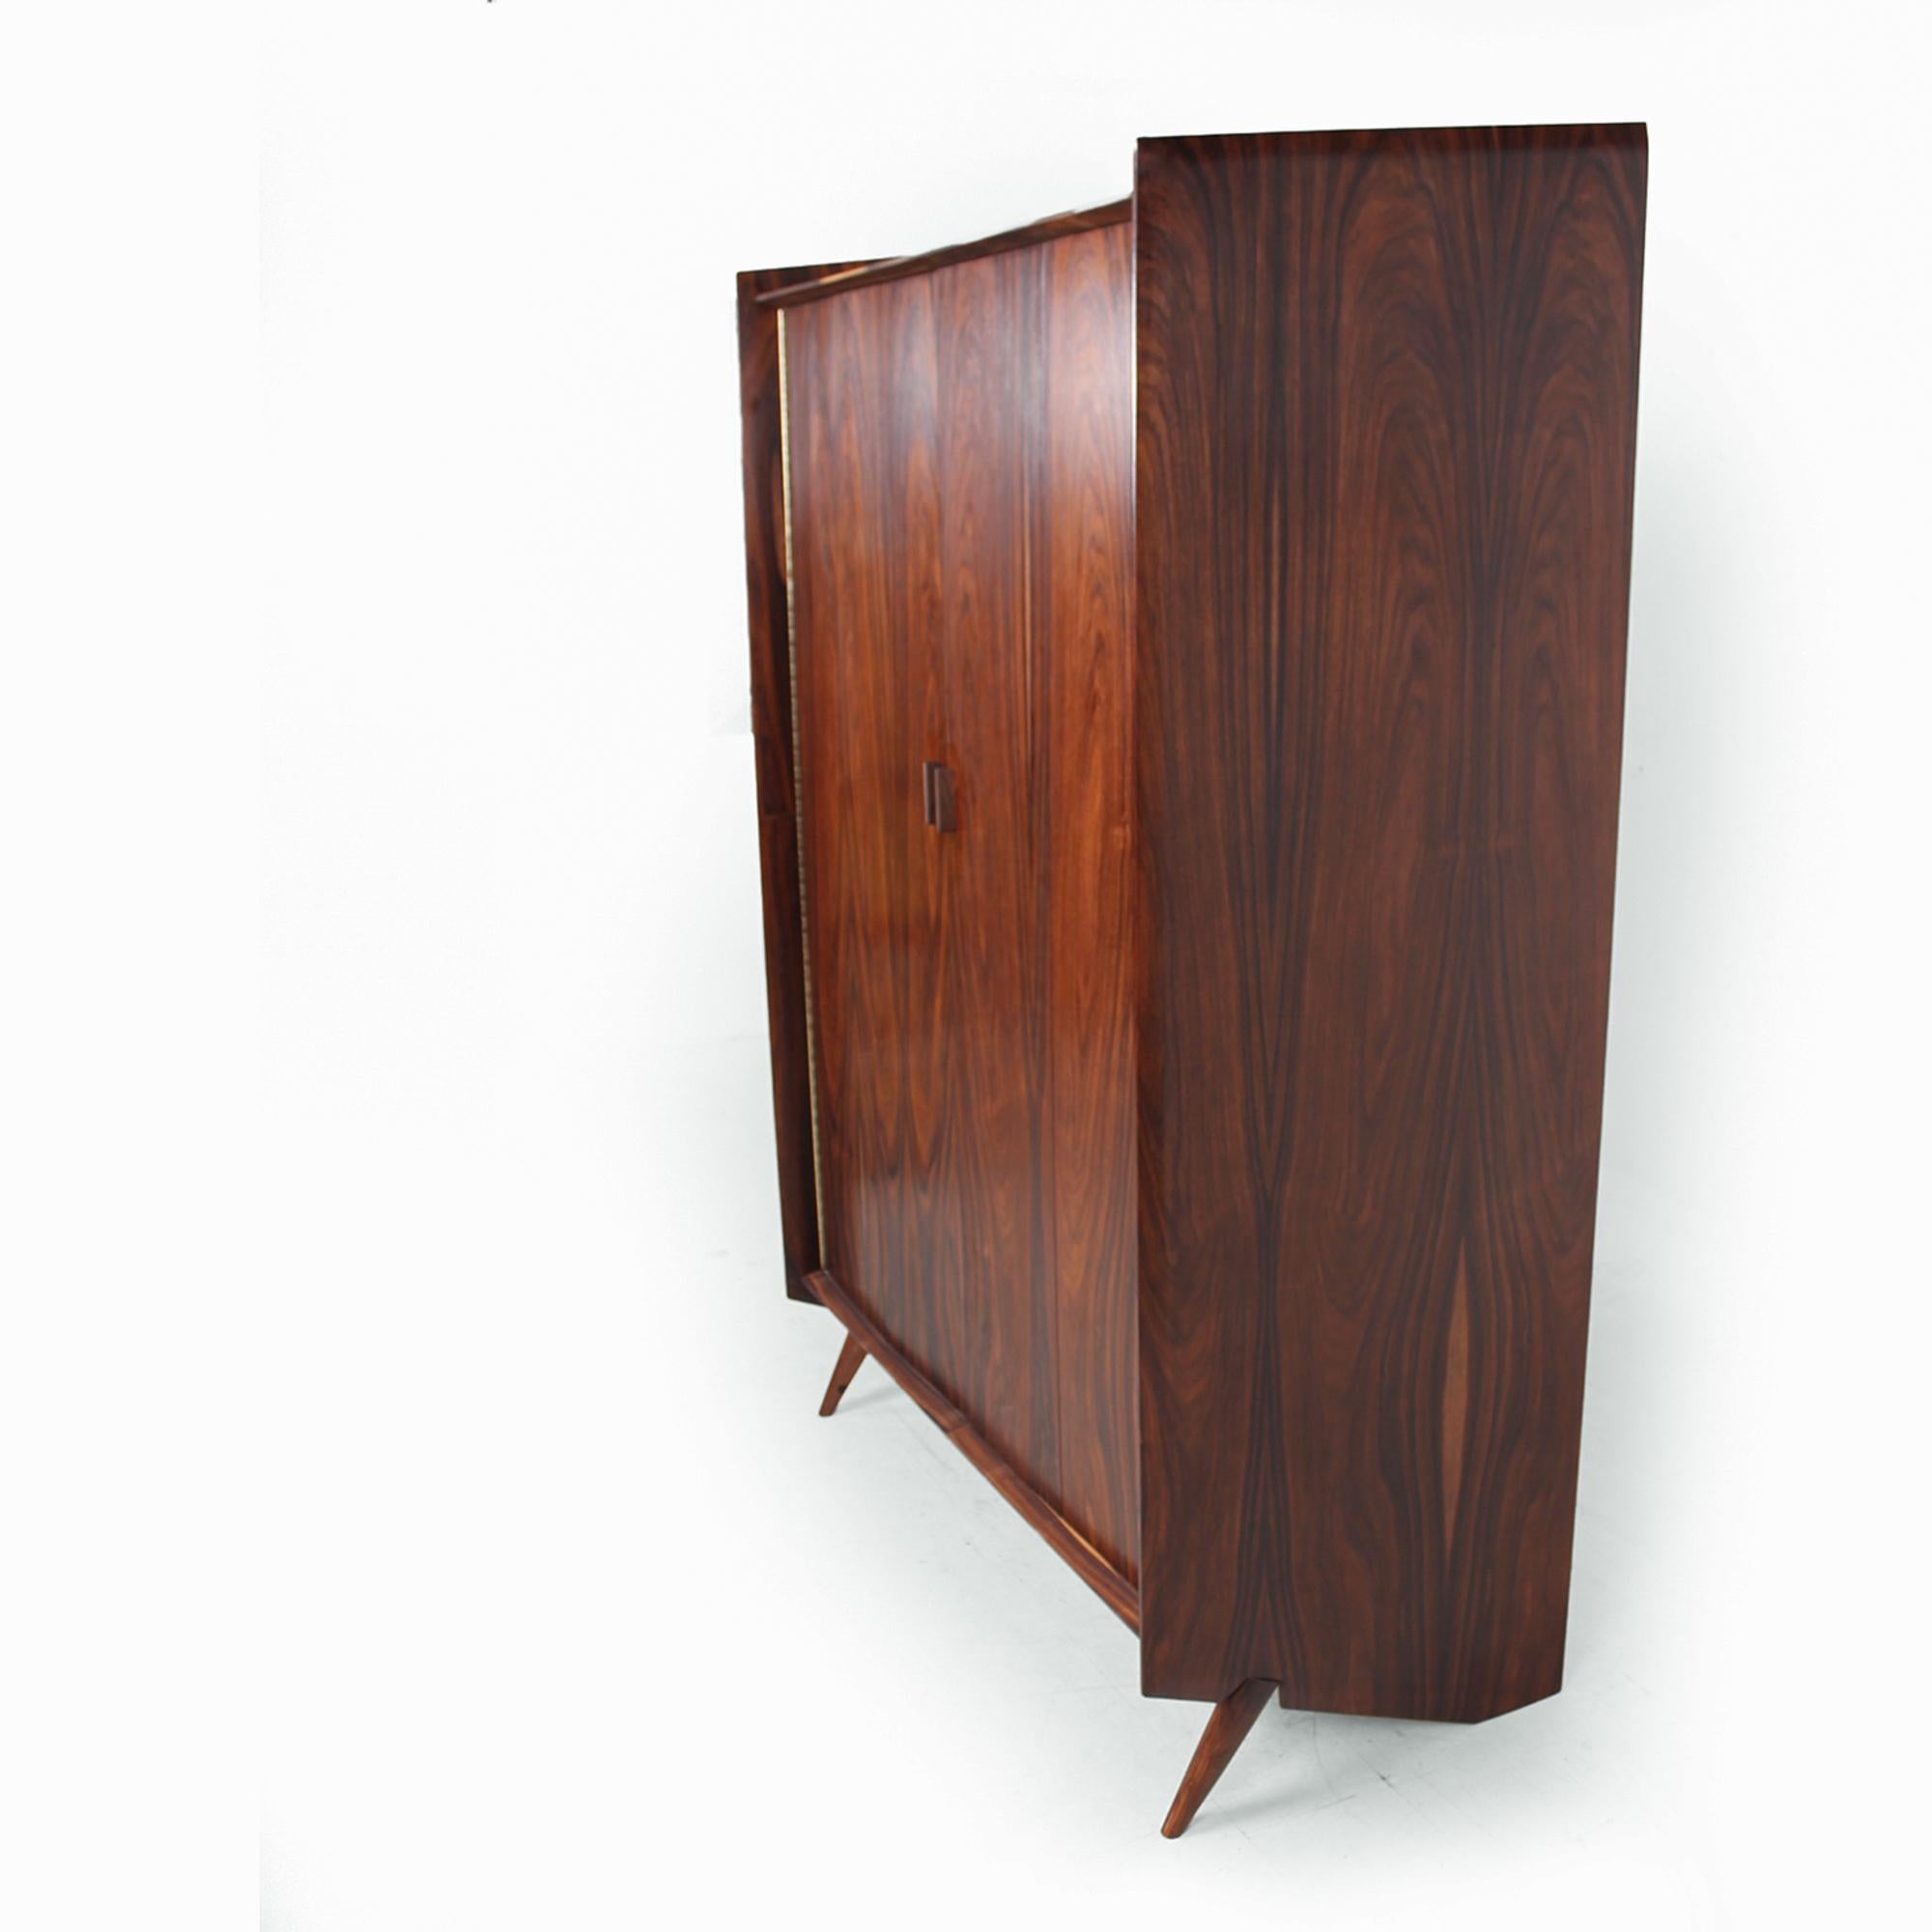 Modern Magnificent Rosewood Armoire Gentleman's Cabinet by Pablo Romo for Ambianic